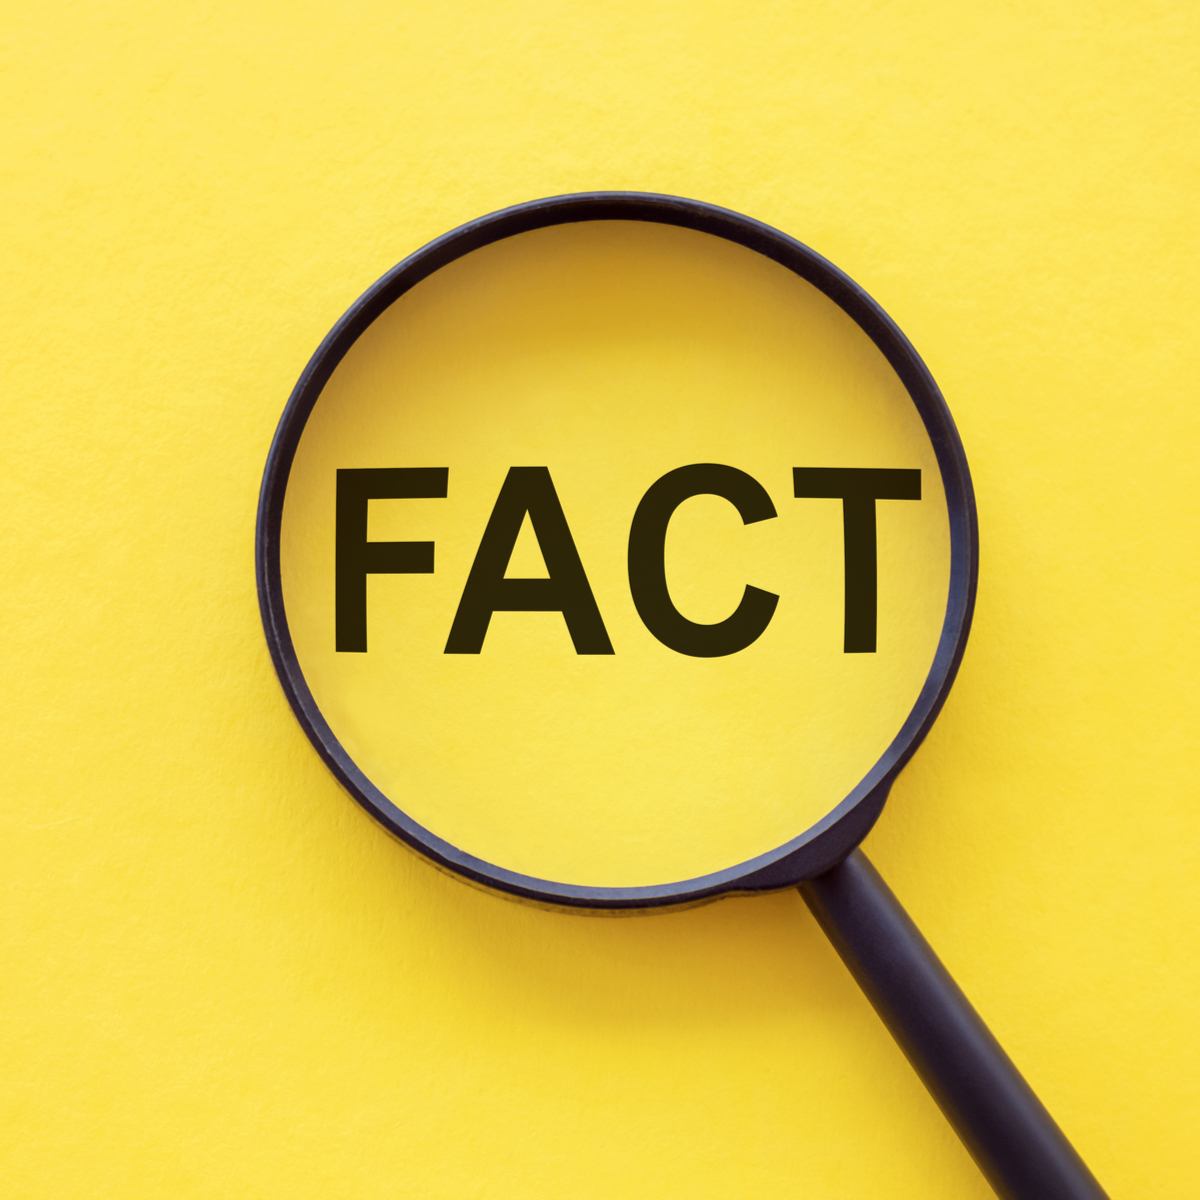 A magnifying glass over the word "fact" on a plain yellow background.